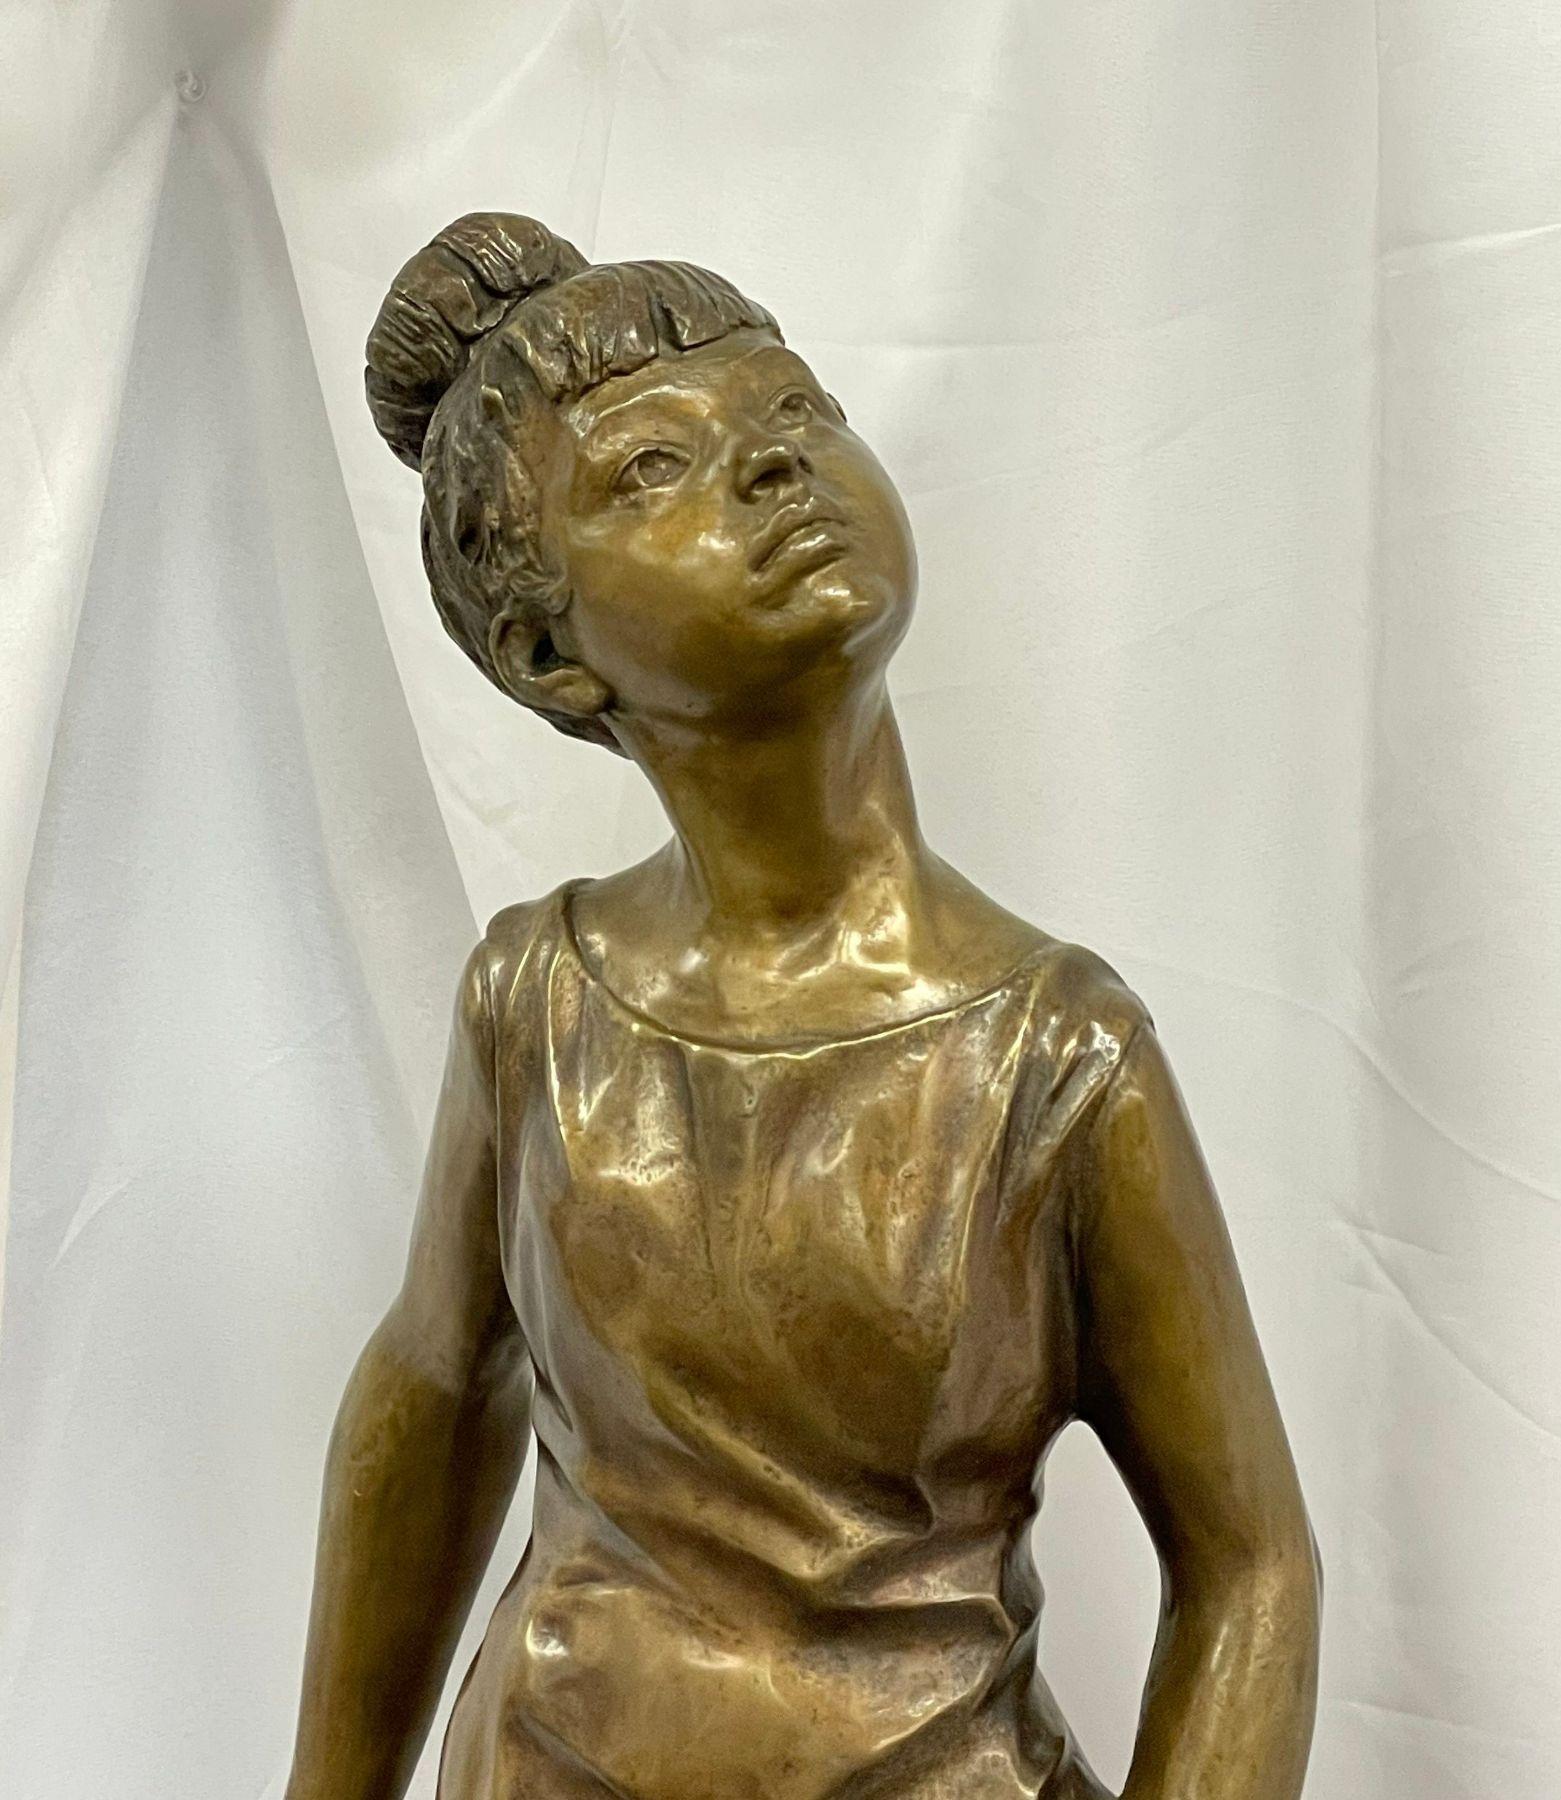 A large bronze Ballerina signed Sergio Benvenuto. A finely sculpted bronze as only Benvenuto can. Here he shines his favorite subject matter, The Ballerina. She stands poised and confident, head held high, legs firmly planted.

Italy,